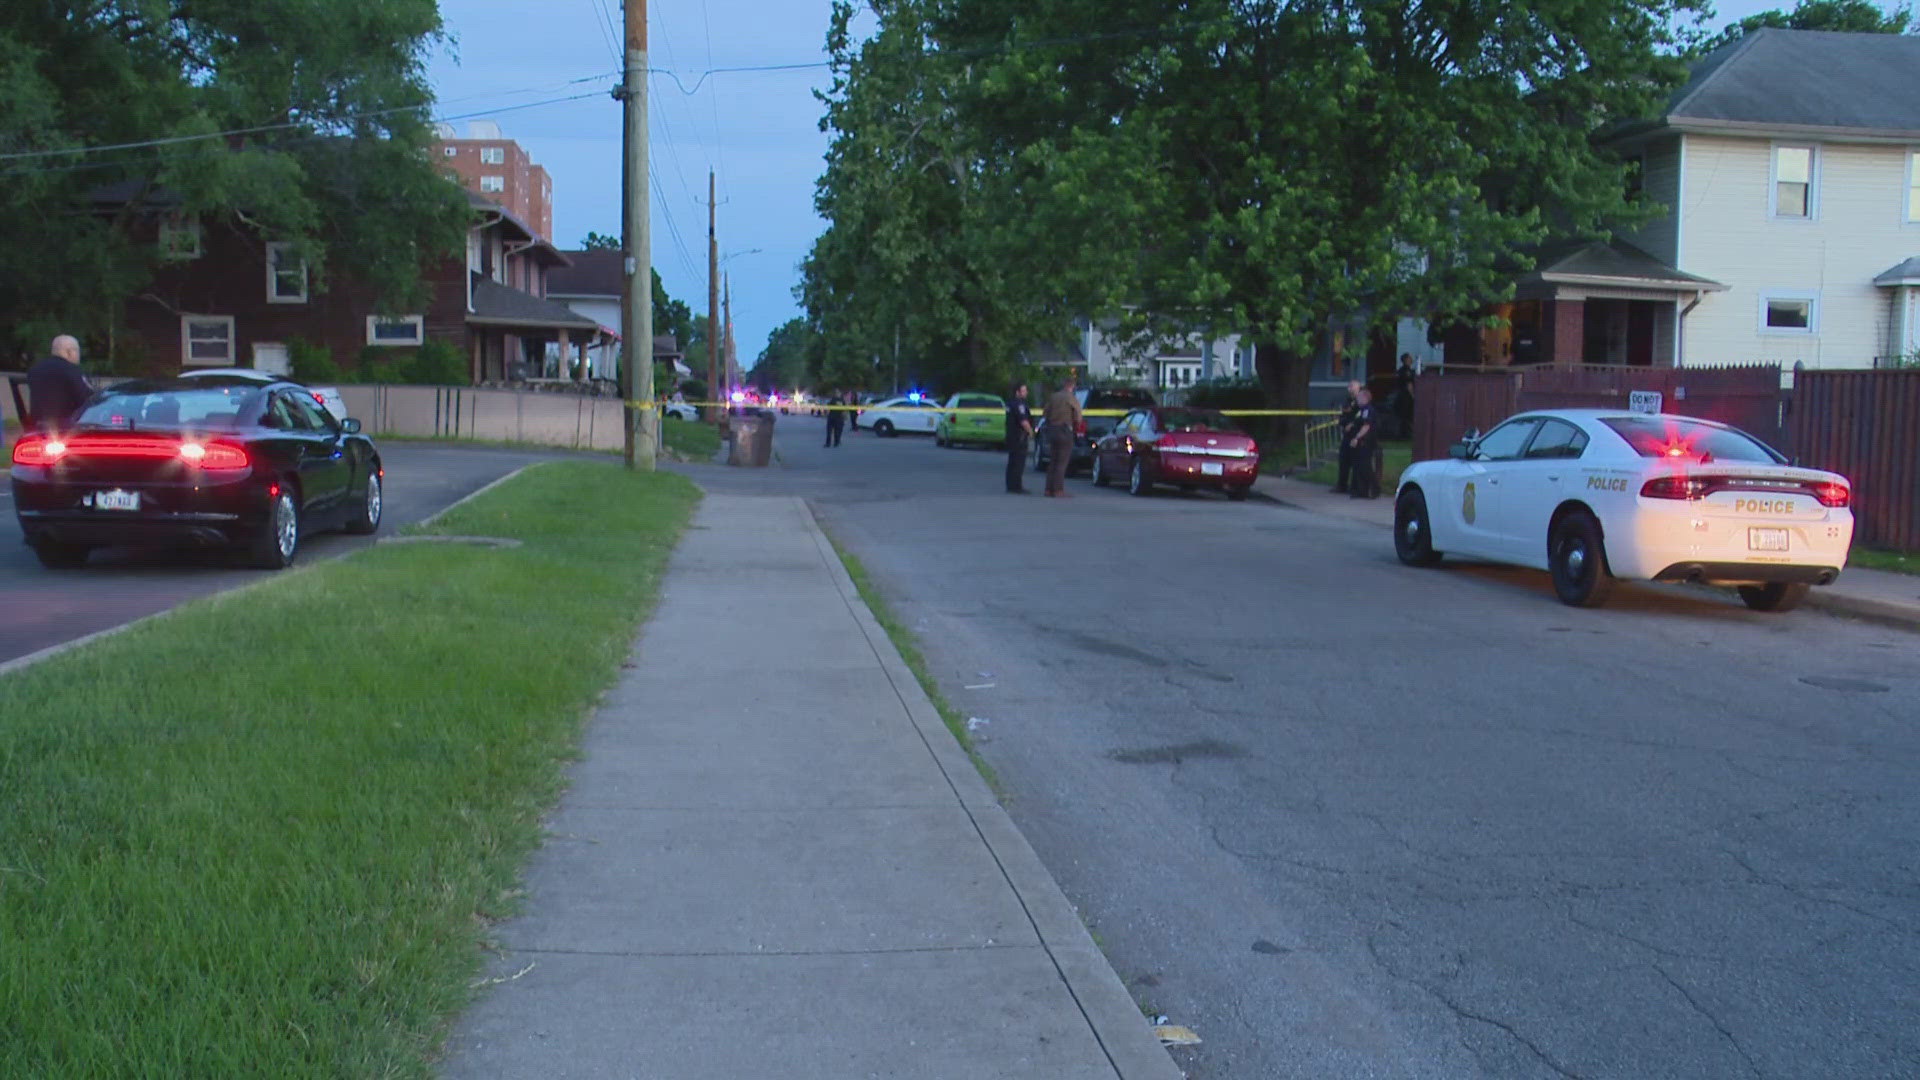 The shooting happened around 8:30 p.m. near 38th Street and Meridian Street on Indy's north side.